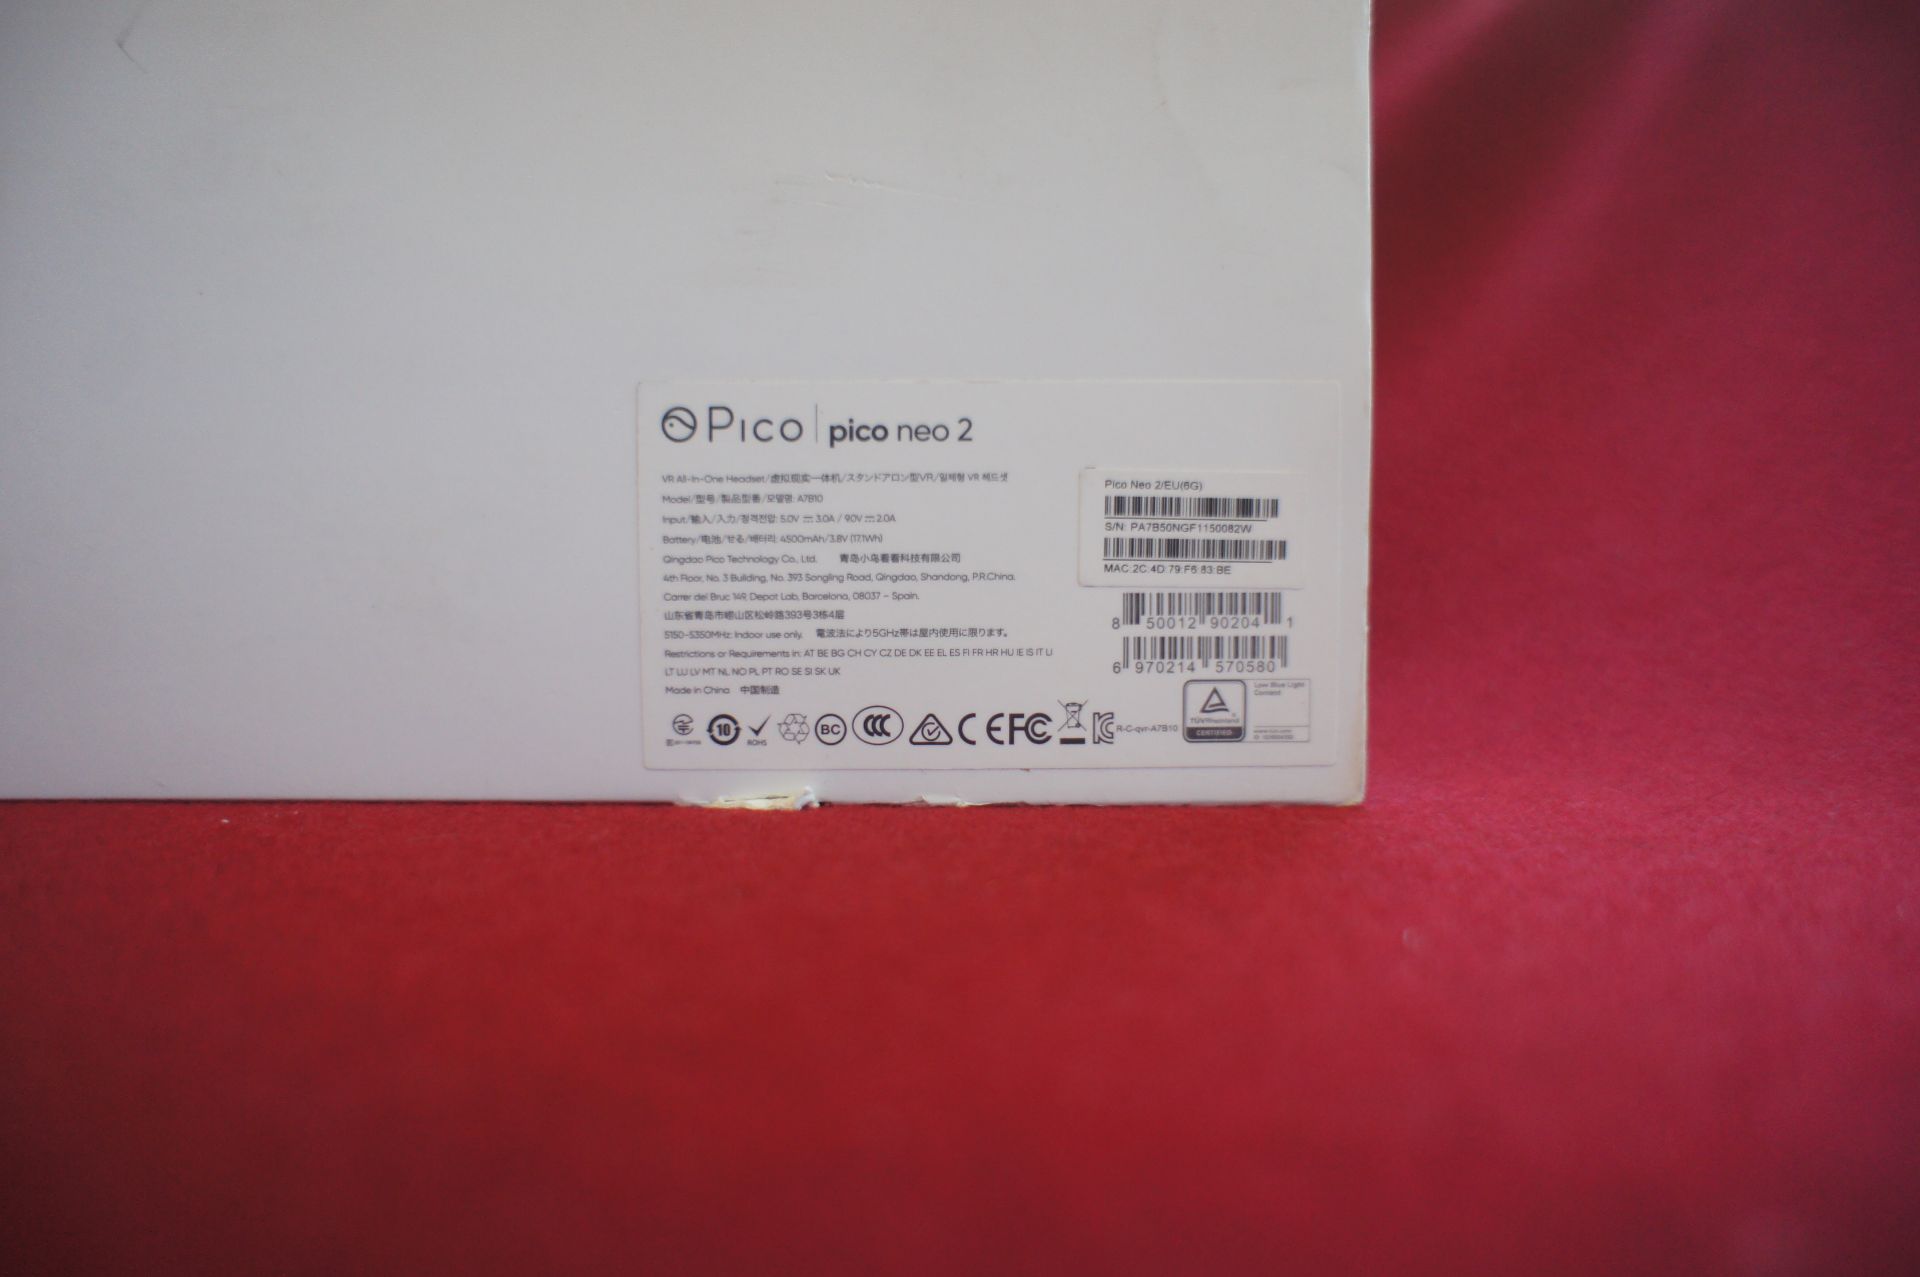 Pico Neo 2 VR headset, Asset Number A6, S/N PA7B50 - Image 2 of 3